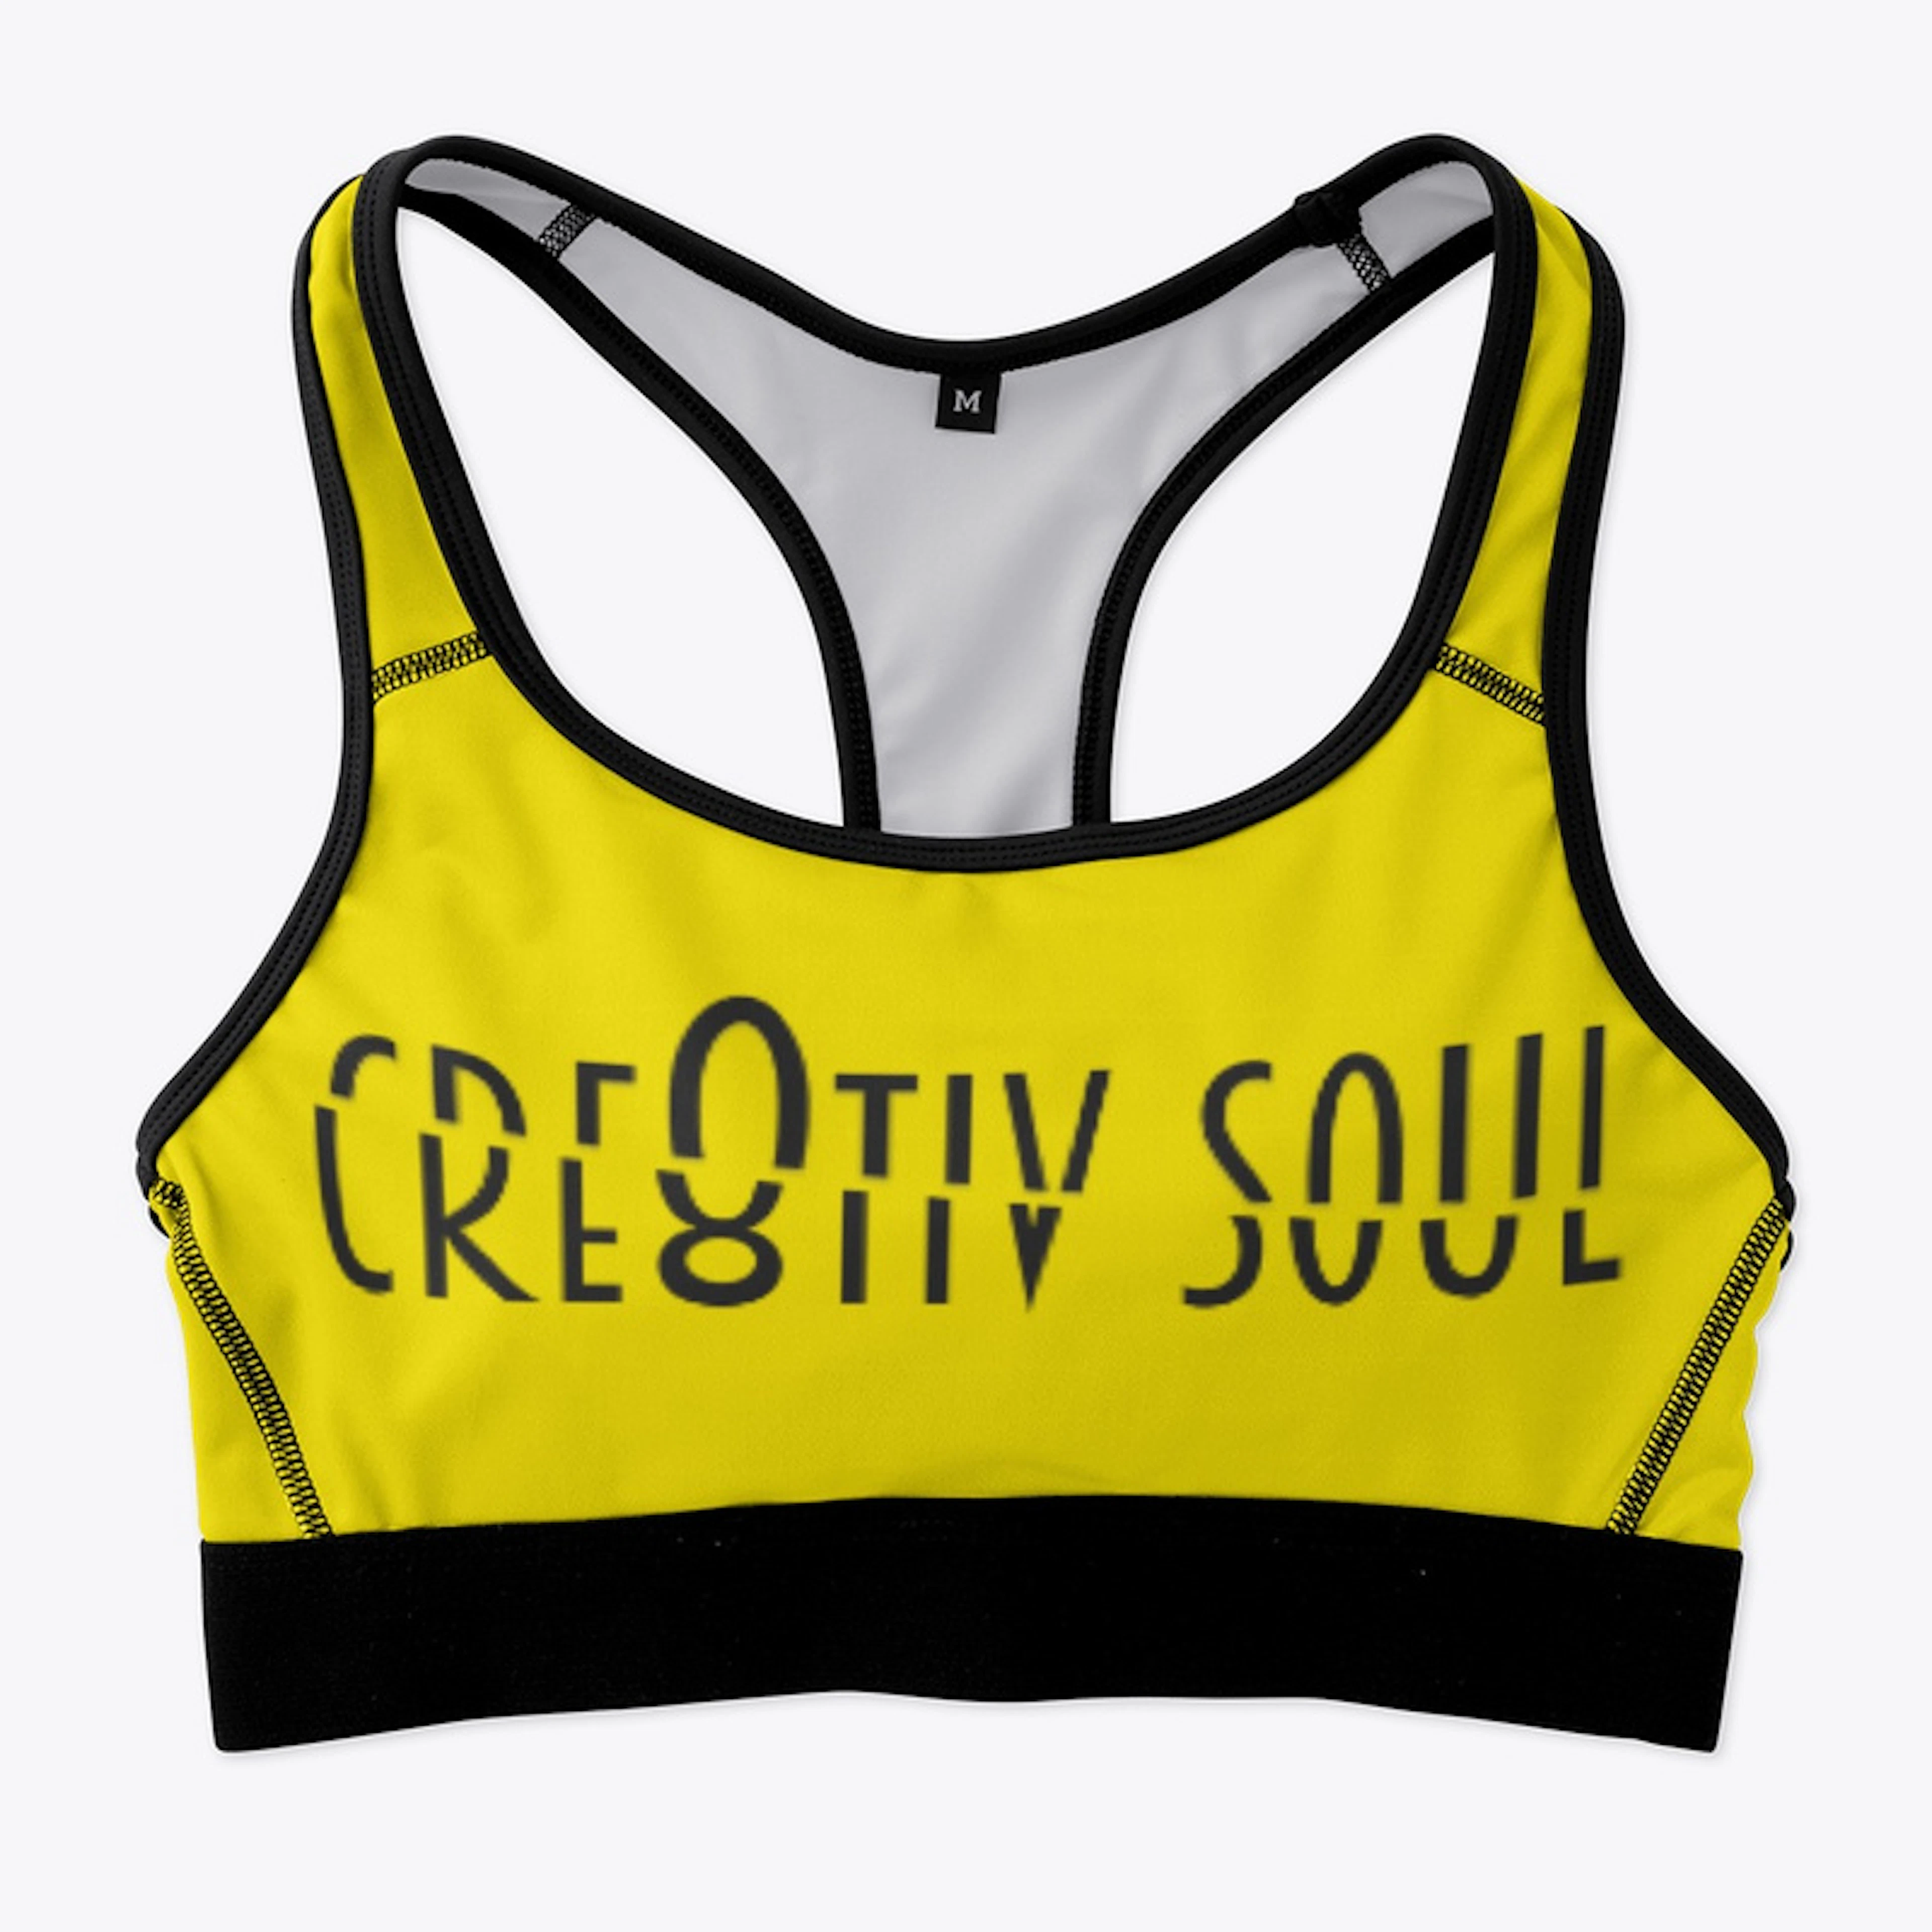 Cre8tiv Soul Collection